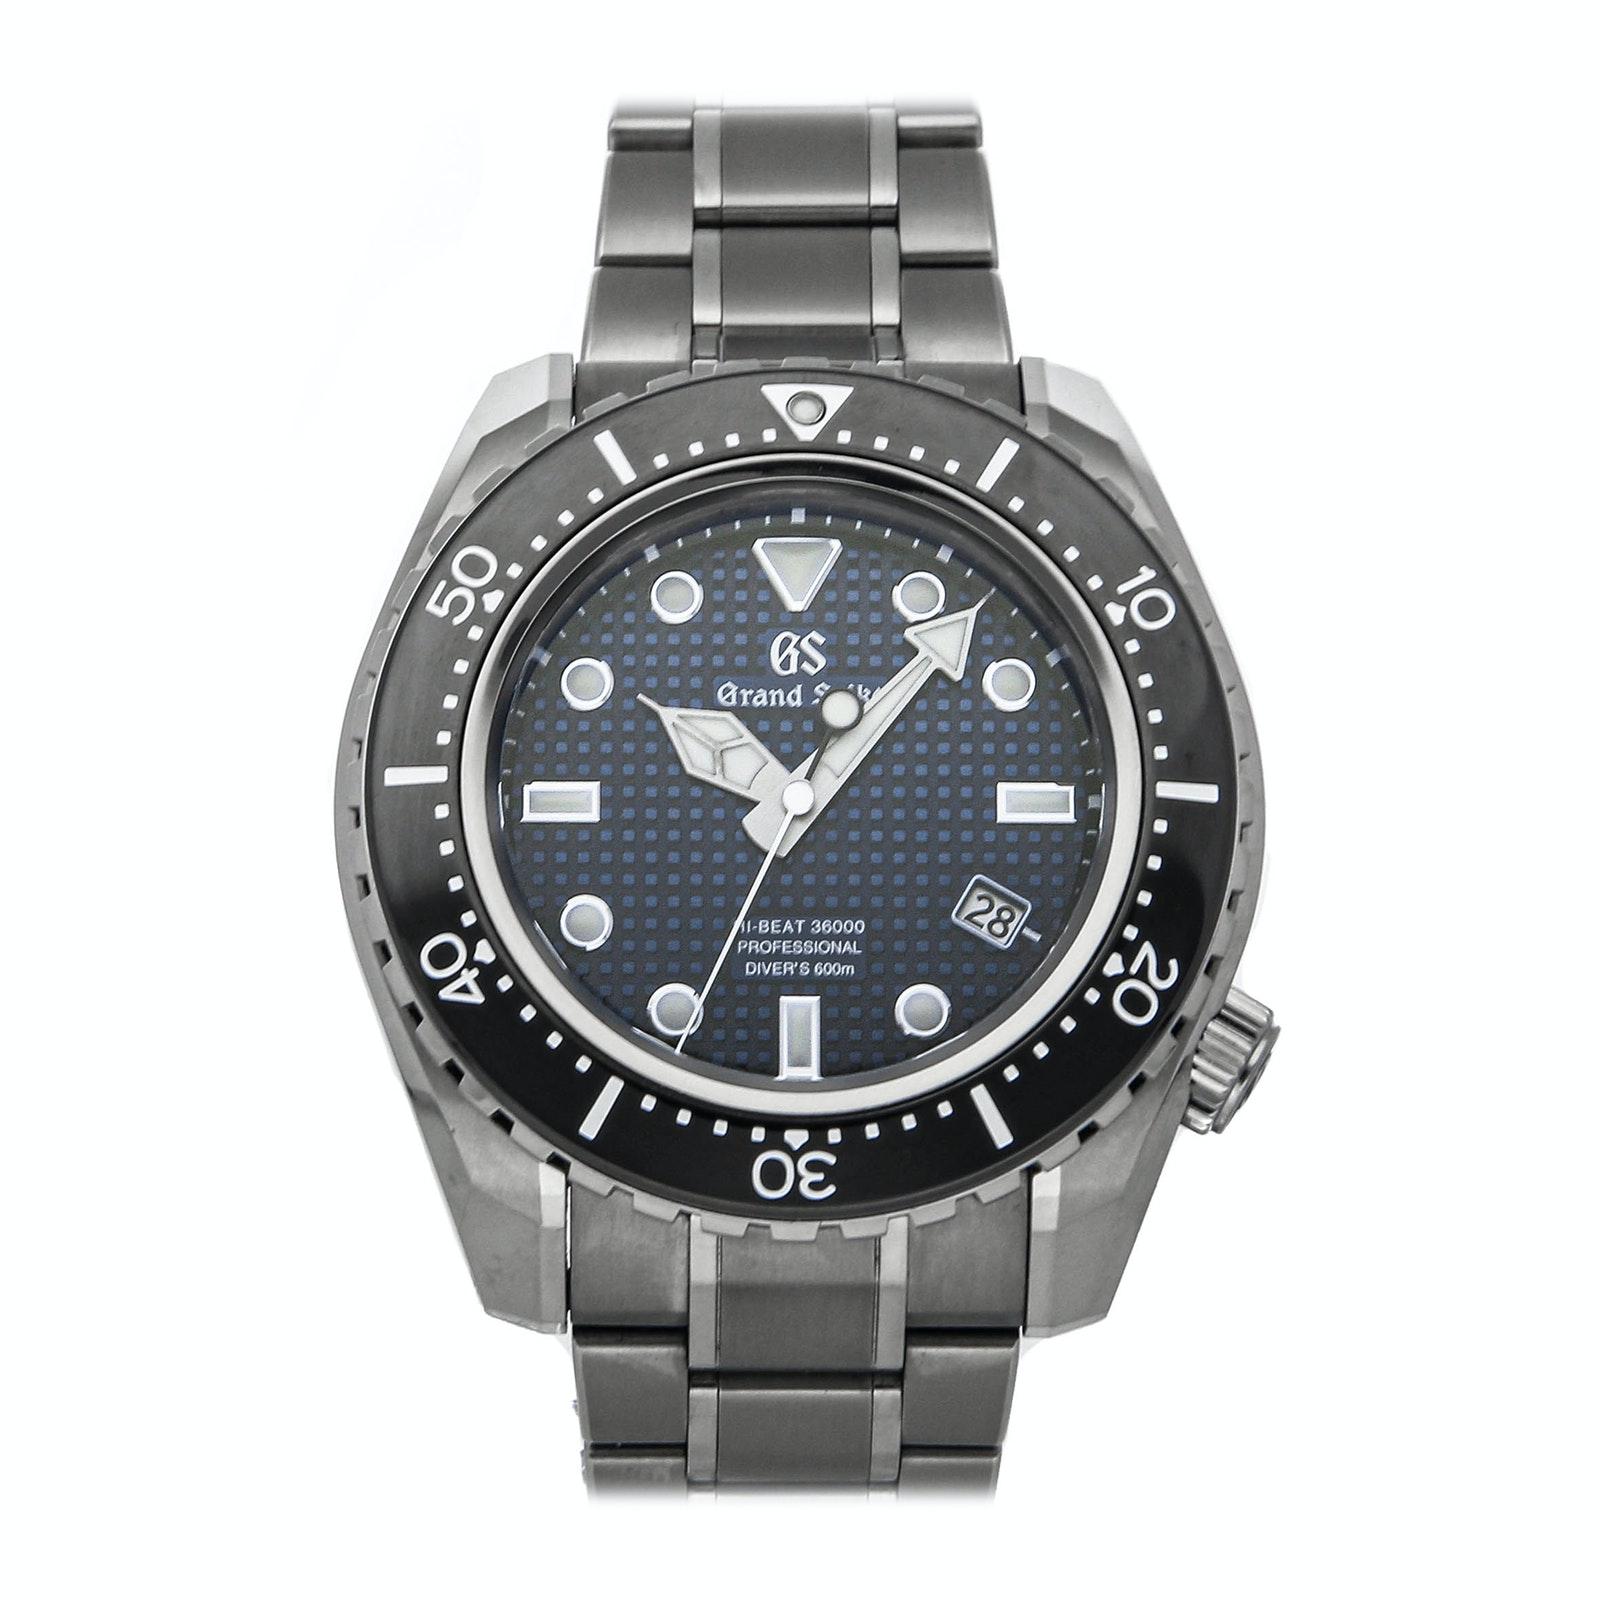 Grand Seiko Hi-Beat 36000 Professional Diver's 600m Limited Edition SBGH257,  Luxury, Watches on Carousell